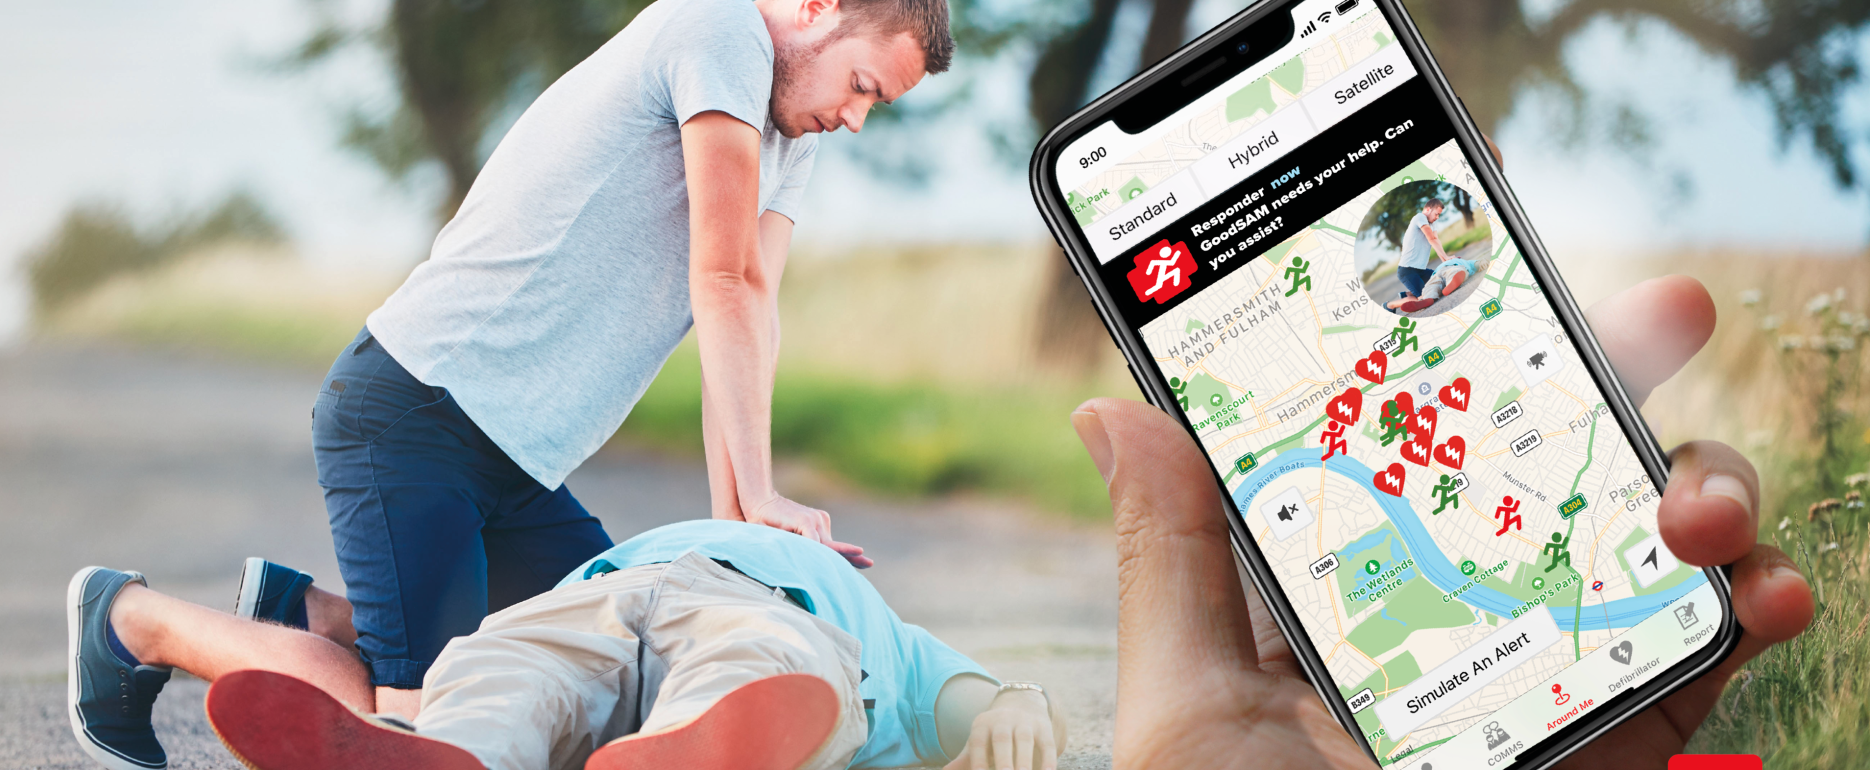 An image with an outdoor background, showing two people: one lying down and the other performing CPR. At the forefront of the image is a hand holding a smart phone with the GoodSam map on it. Below are GoodSam logos.